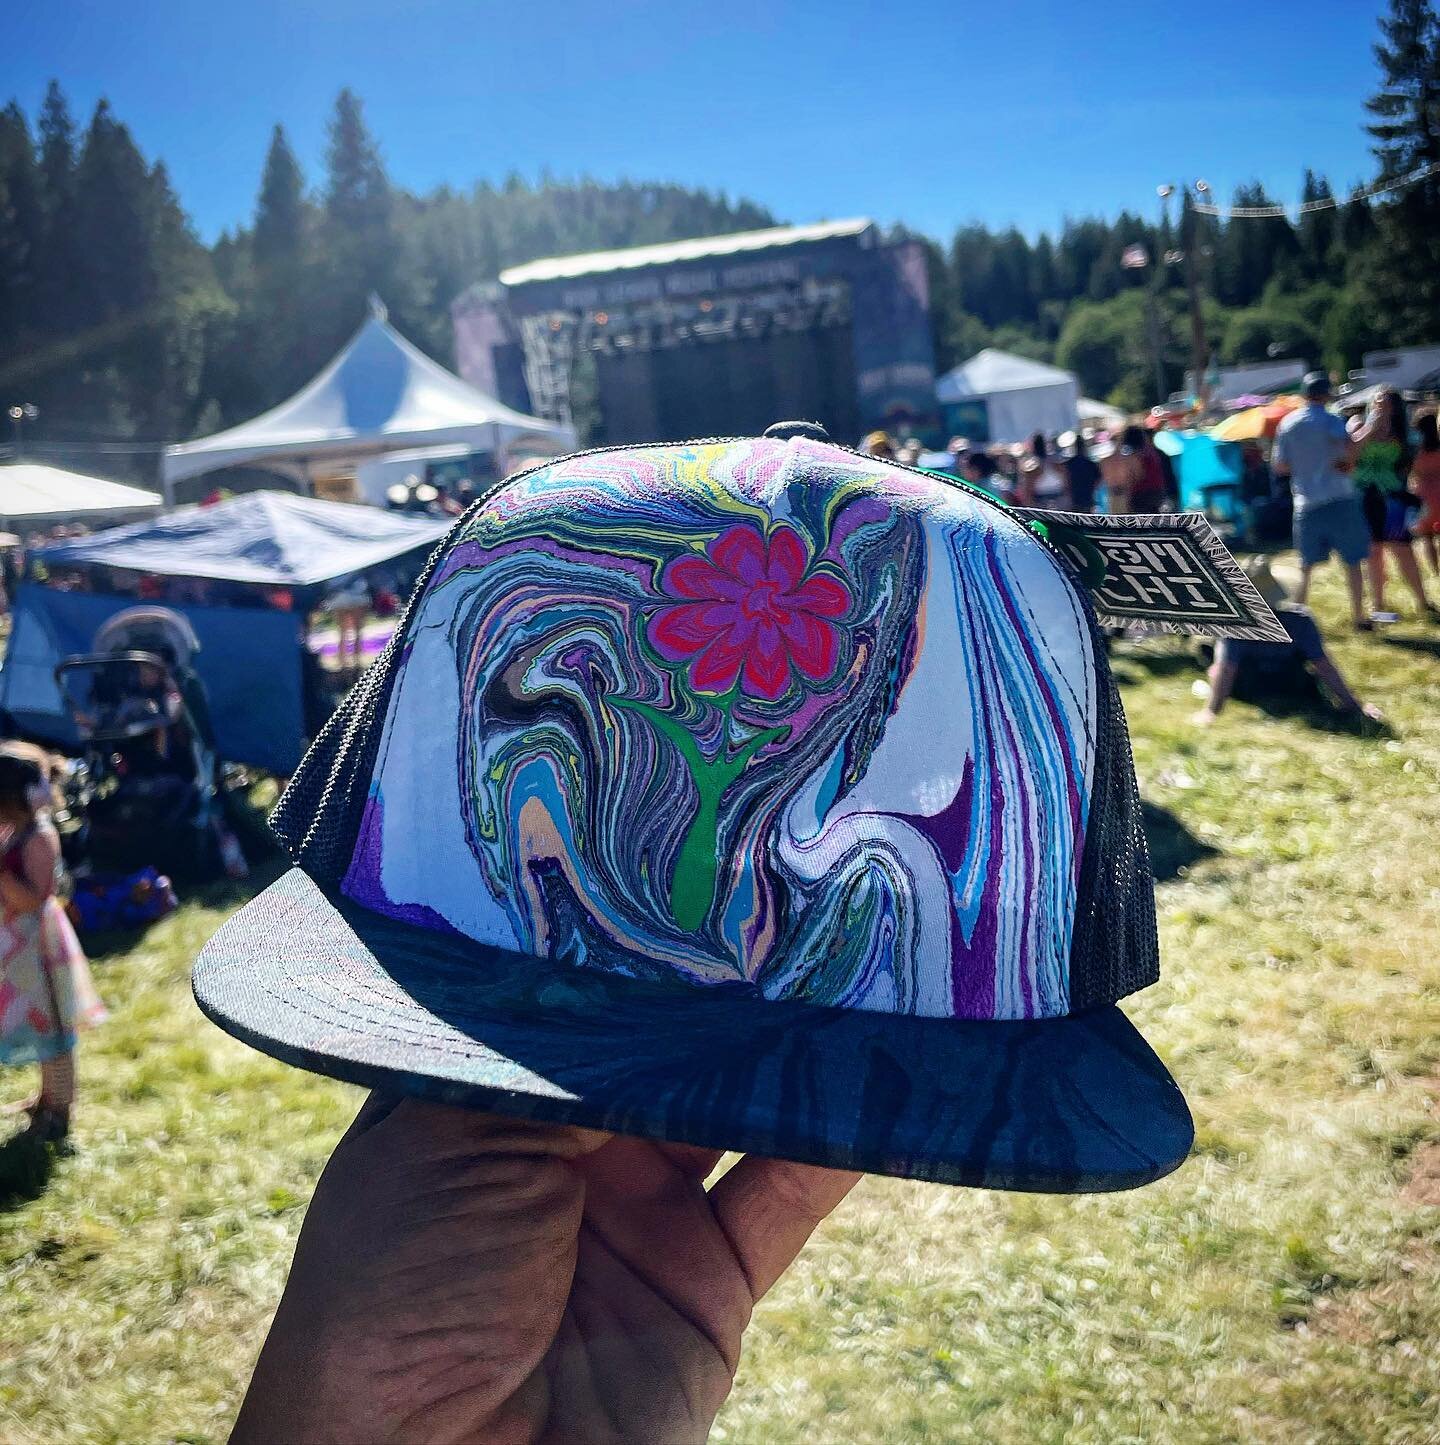 We are blooming over here at @highsierramusic be sure to stop on by and check it out! 

#domchi #blooming #hats